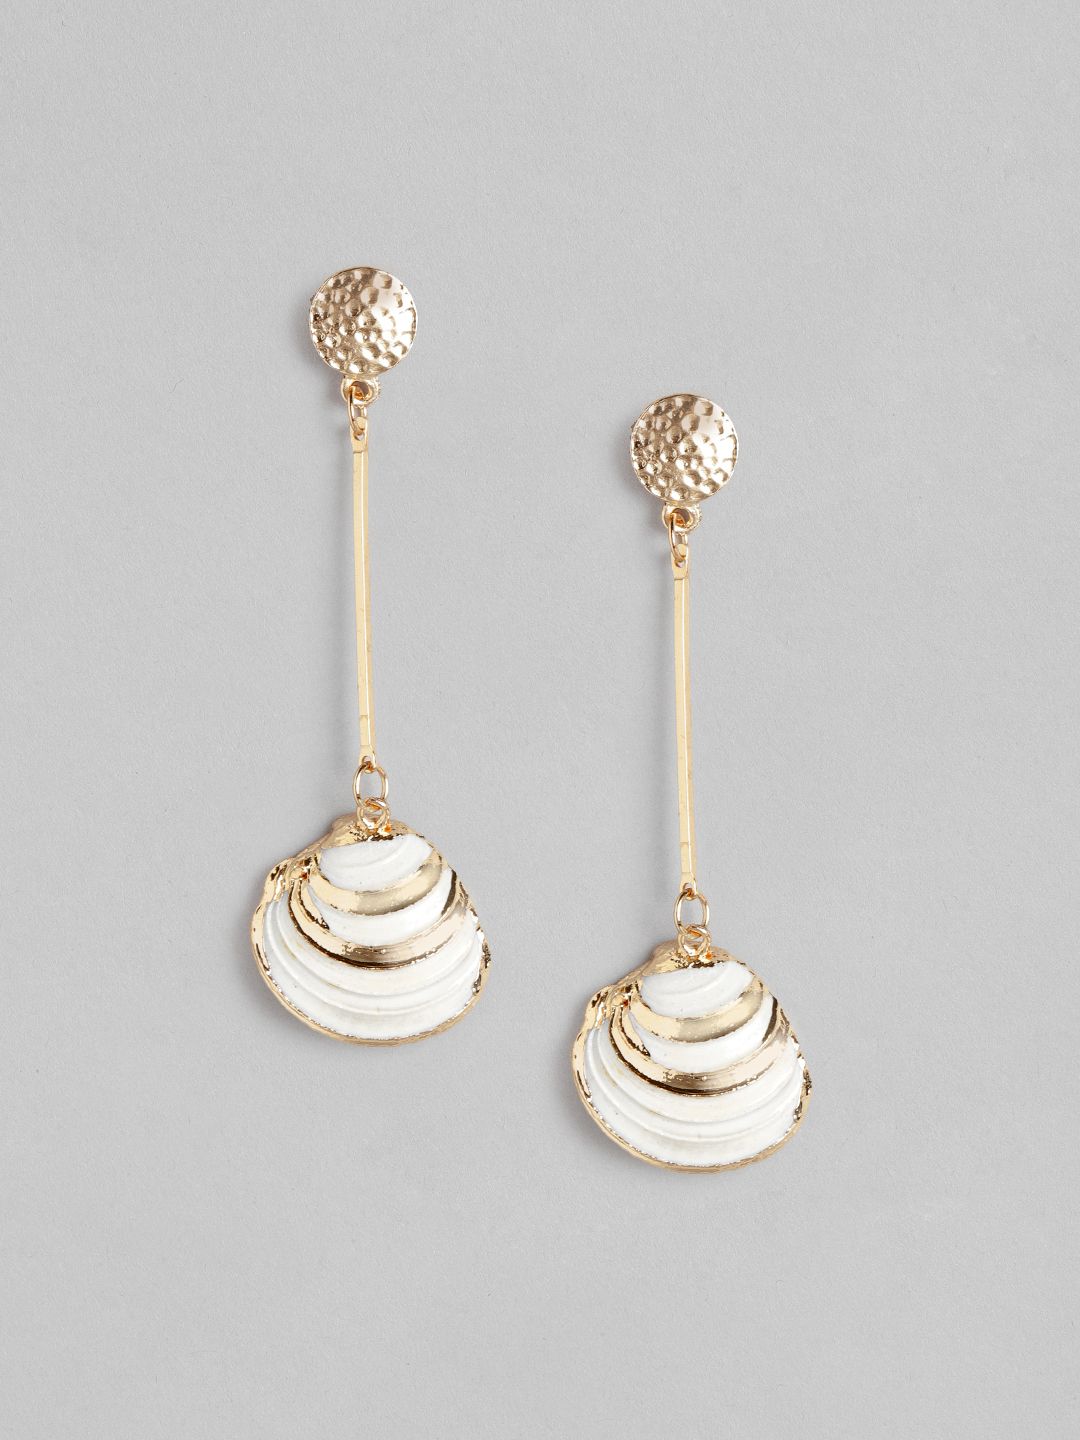 DressBerry Gold-Toned & Off-White Hammered Effect Drop Earrings with Sea Shell Detail Price in India